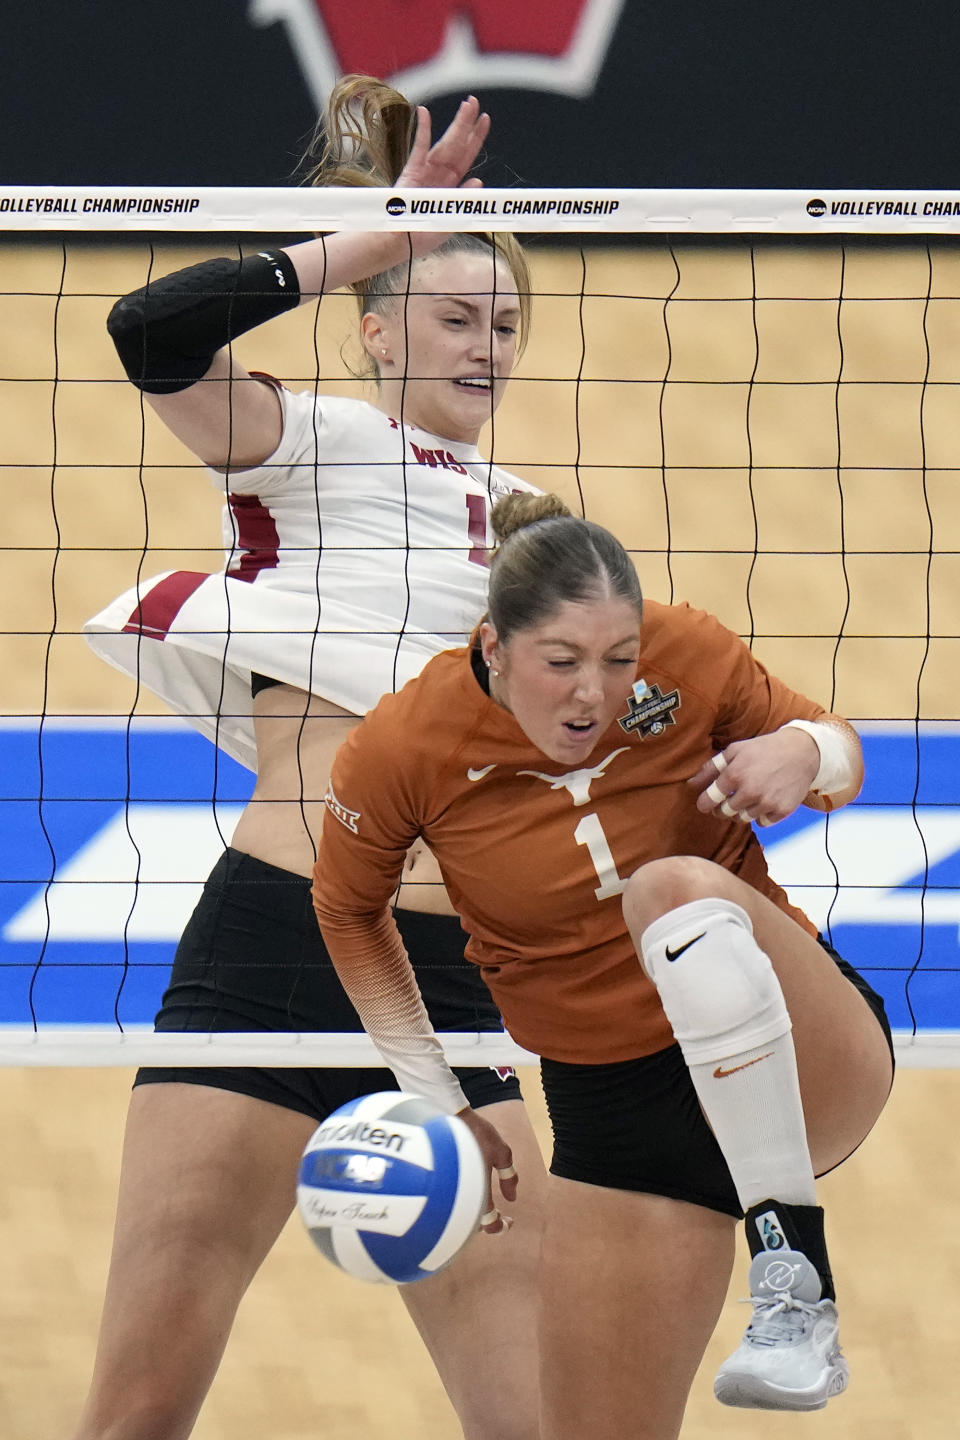 Wisconsin's Anna Smrek (14) scores against Texas's Ella Swindle (1) during a semifinal match in the NCAA Division I women's college volleyball tournament Thursday, Dec. 14, 2023, in Tampa, Fla. (AP Photo/Chris O'Meara)